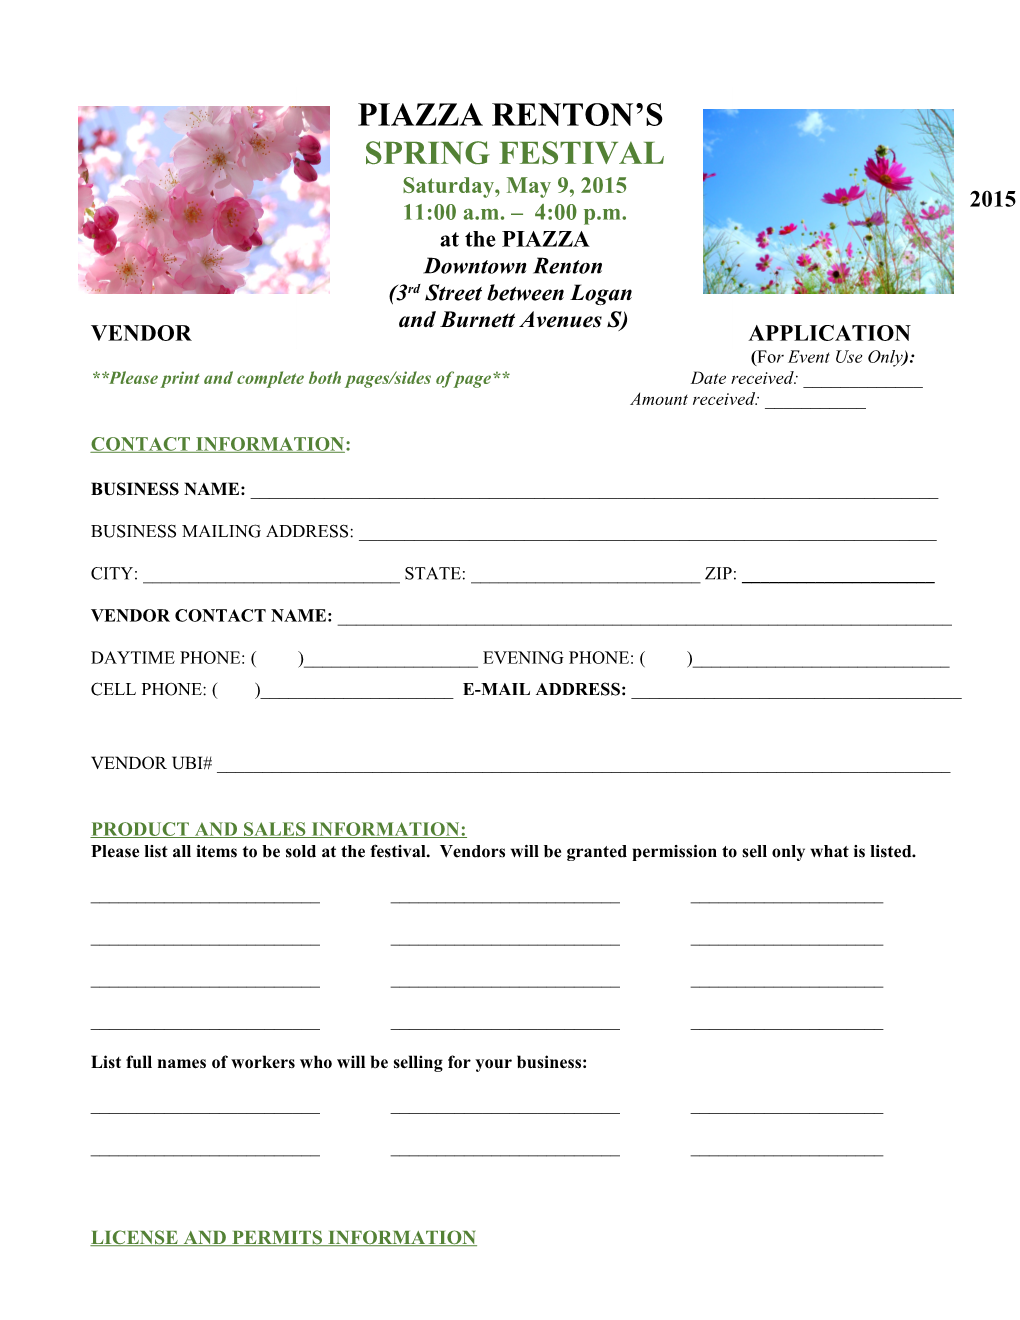 2015 VENDOR APPLICATION ( for Event Use Only)